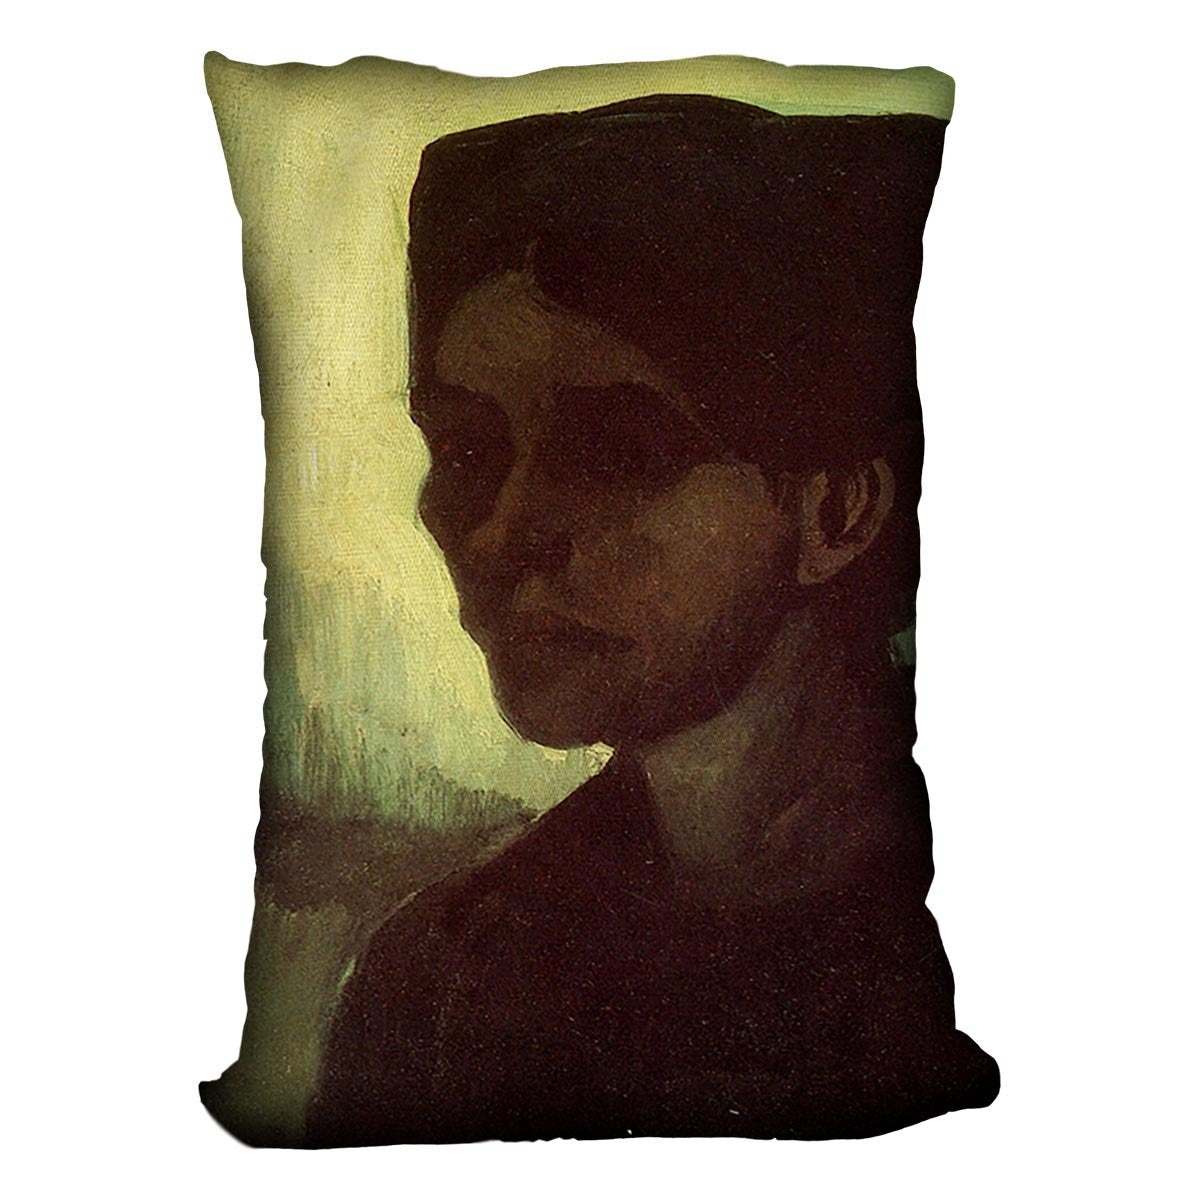 Head of a Young Peasant Woman with Dark Cap by Van Gogh Throw Pillow